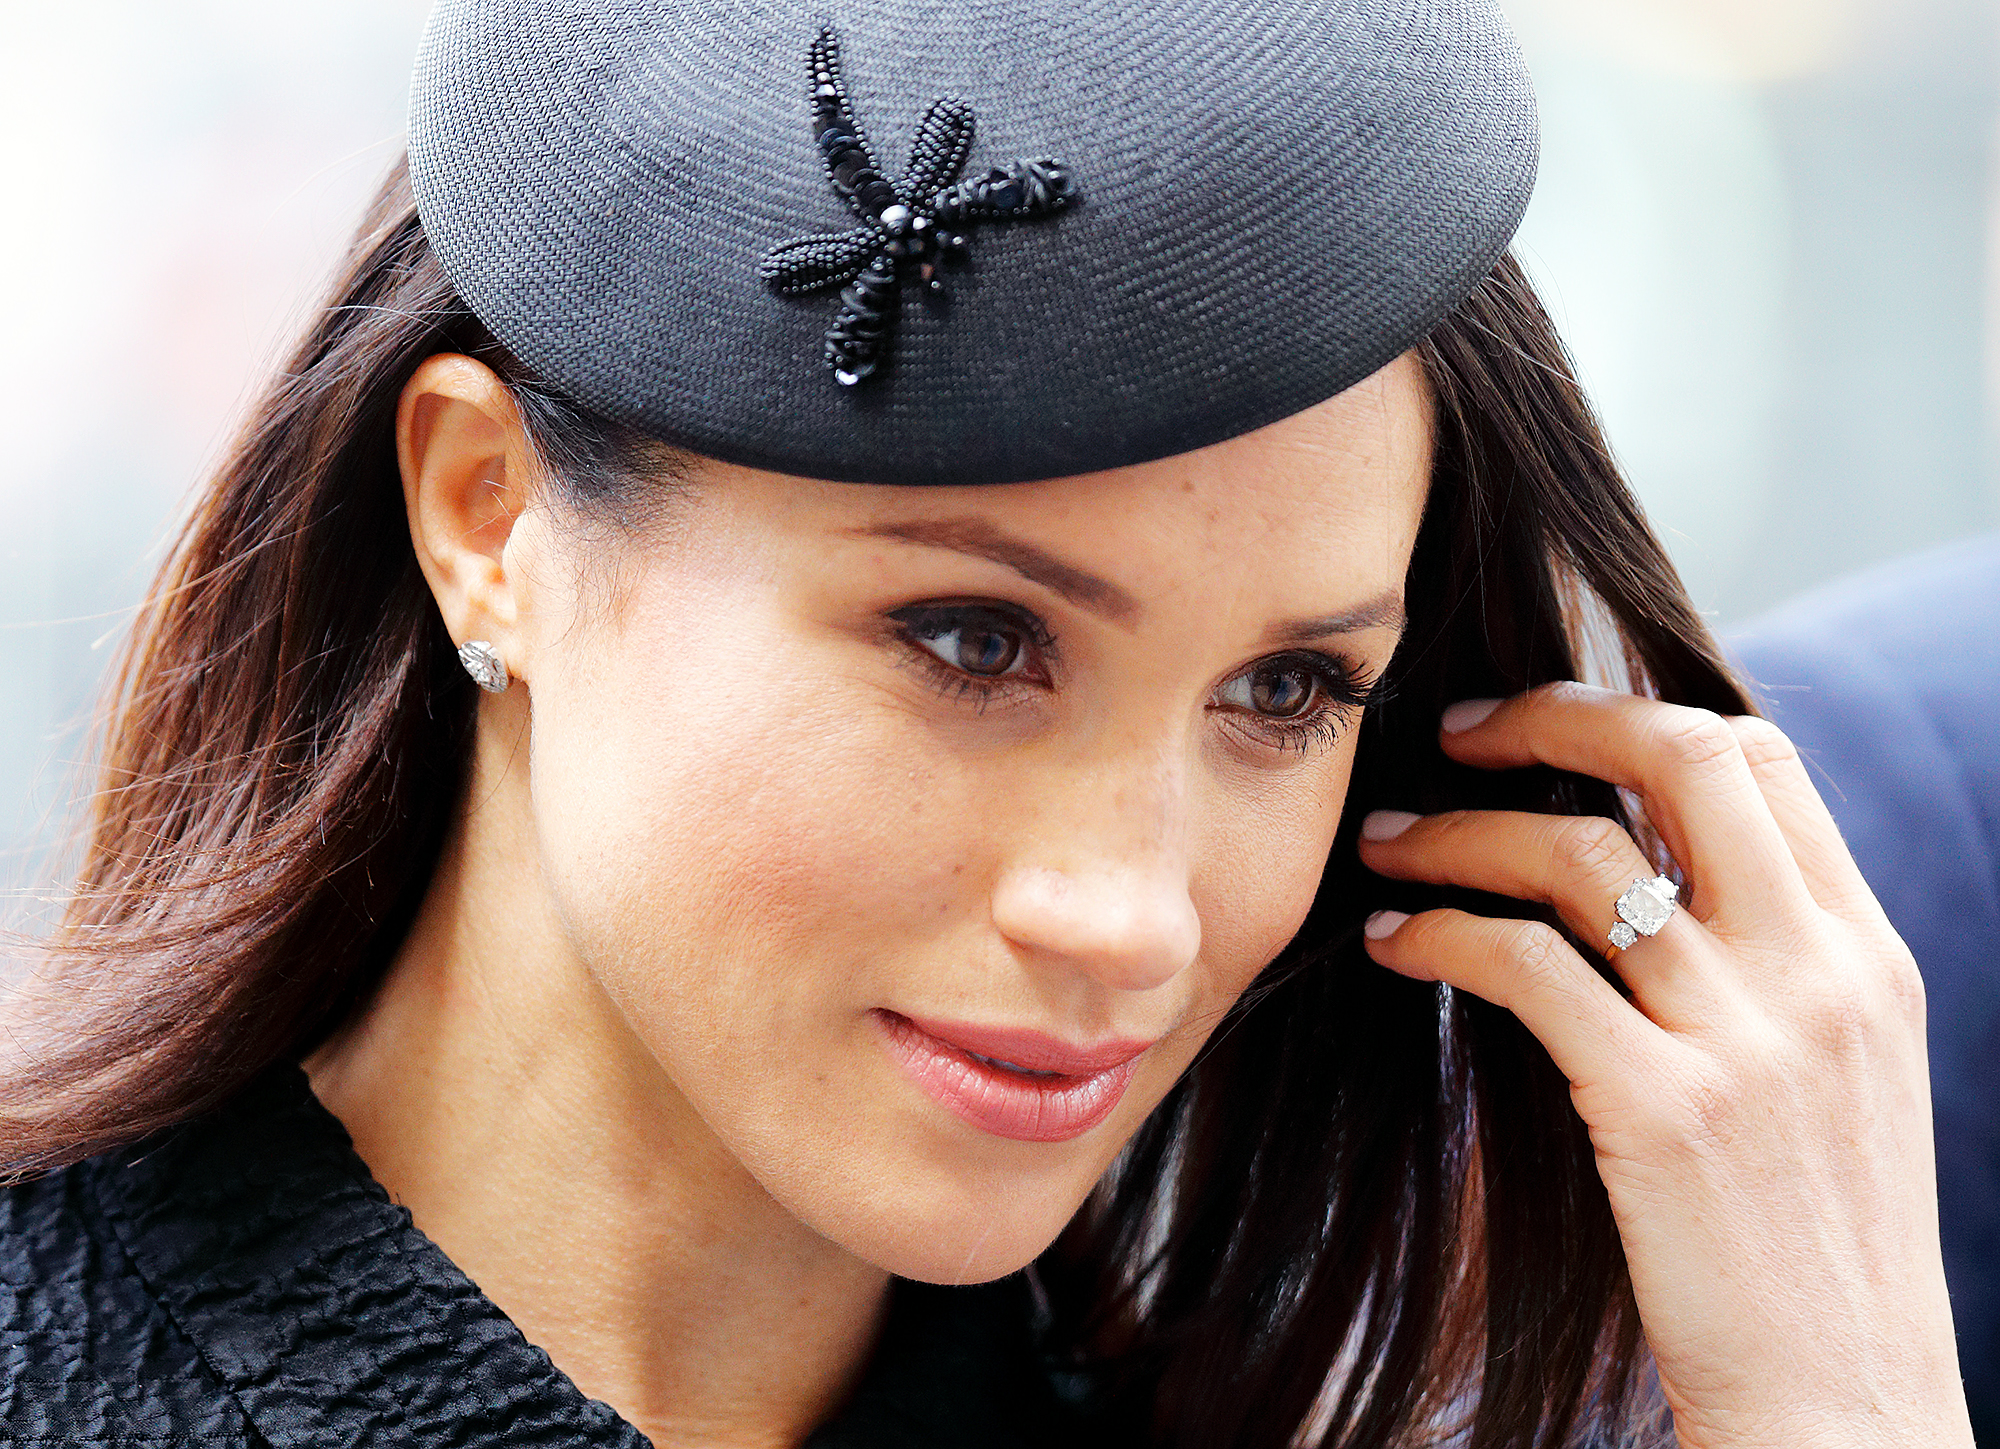 Meghan Markle has 'lost' her engagement ring from Prince Harry